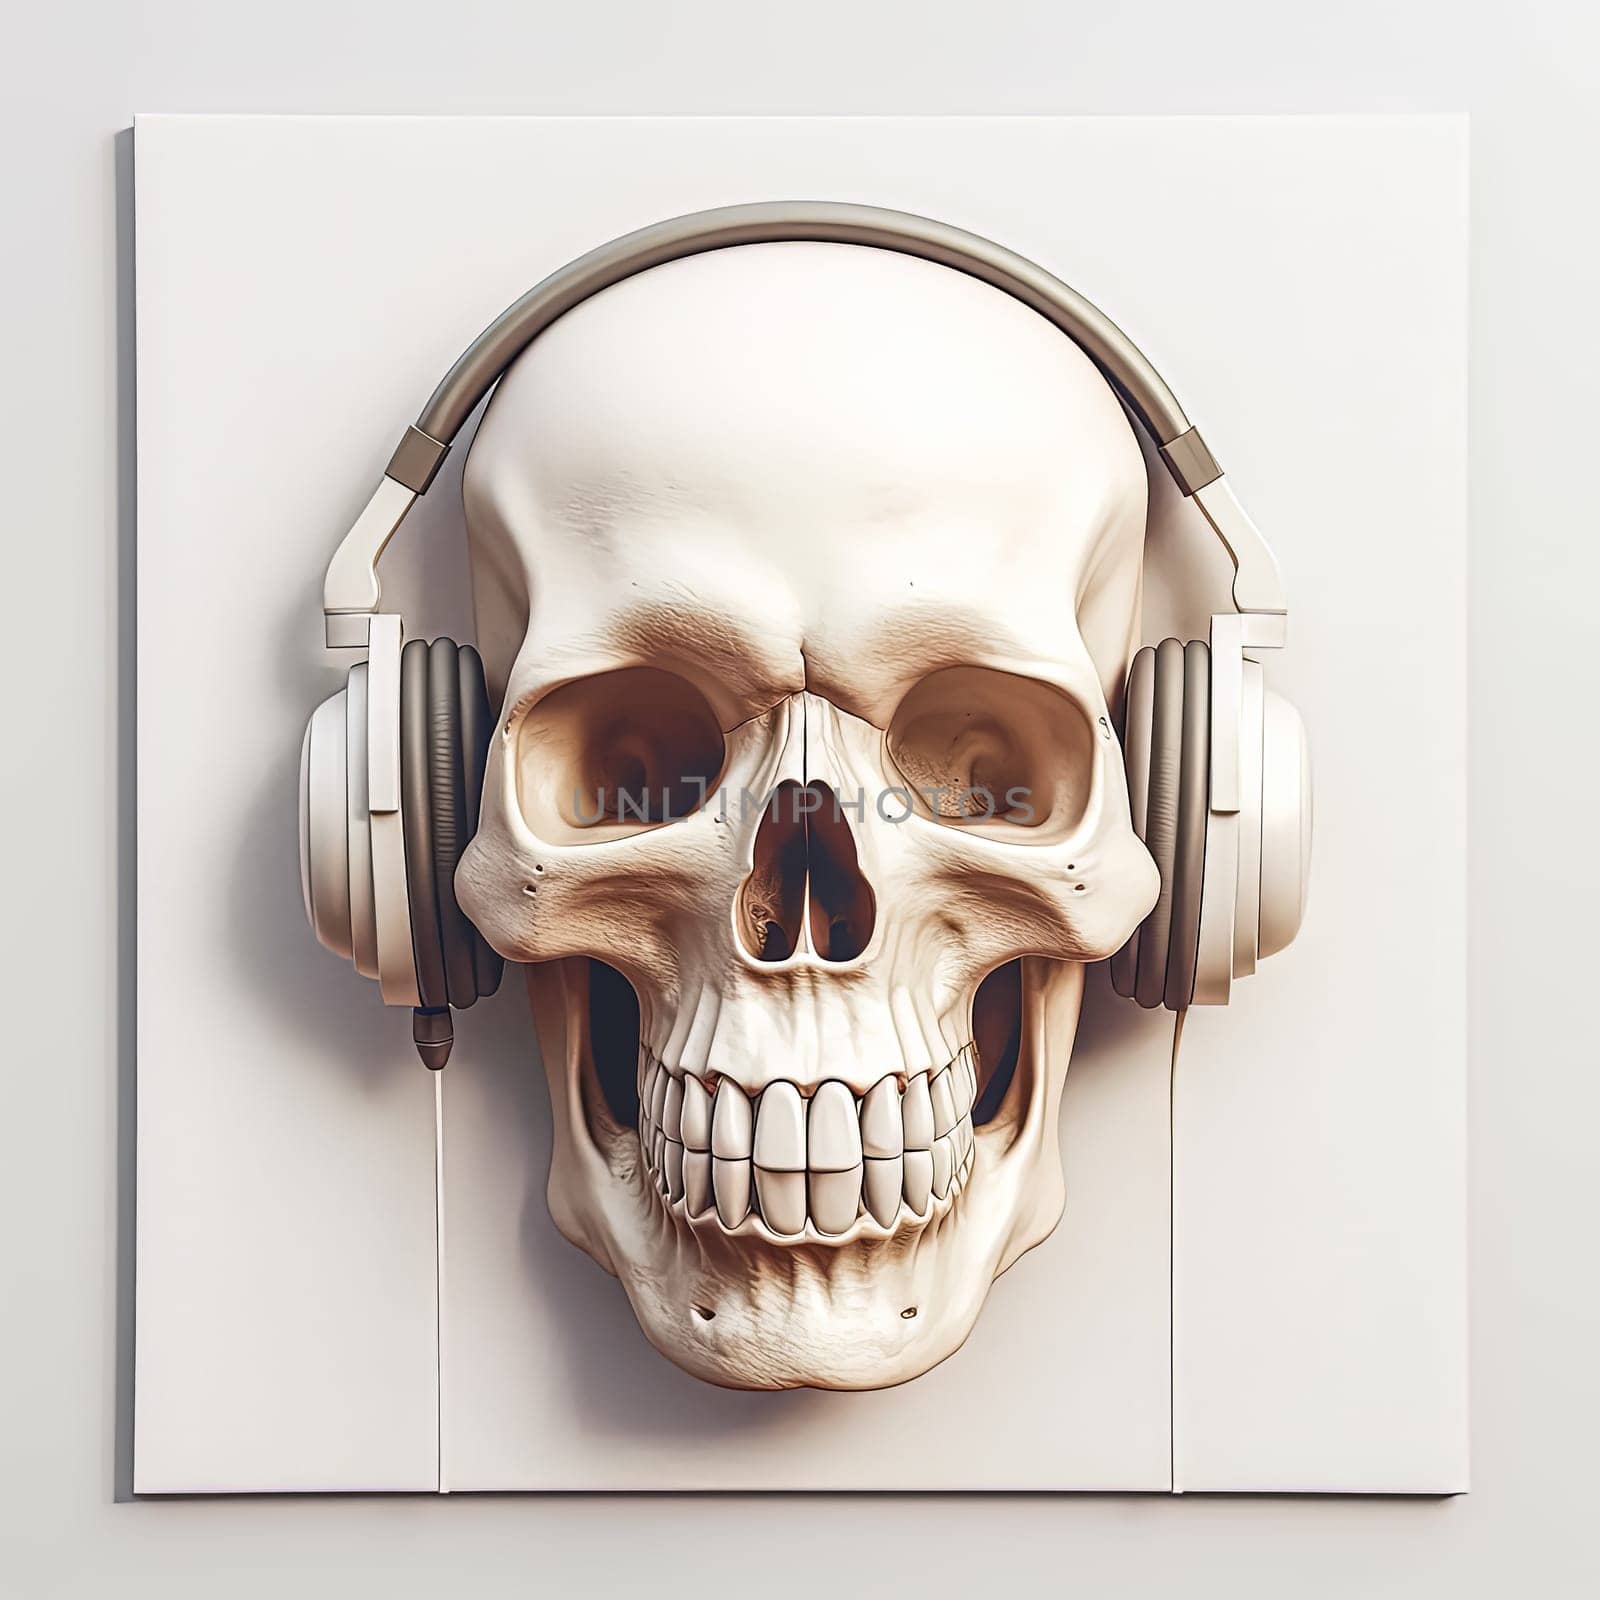 Skull with headphones on it by Alla_Morozova93